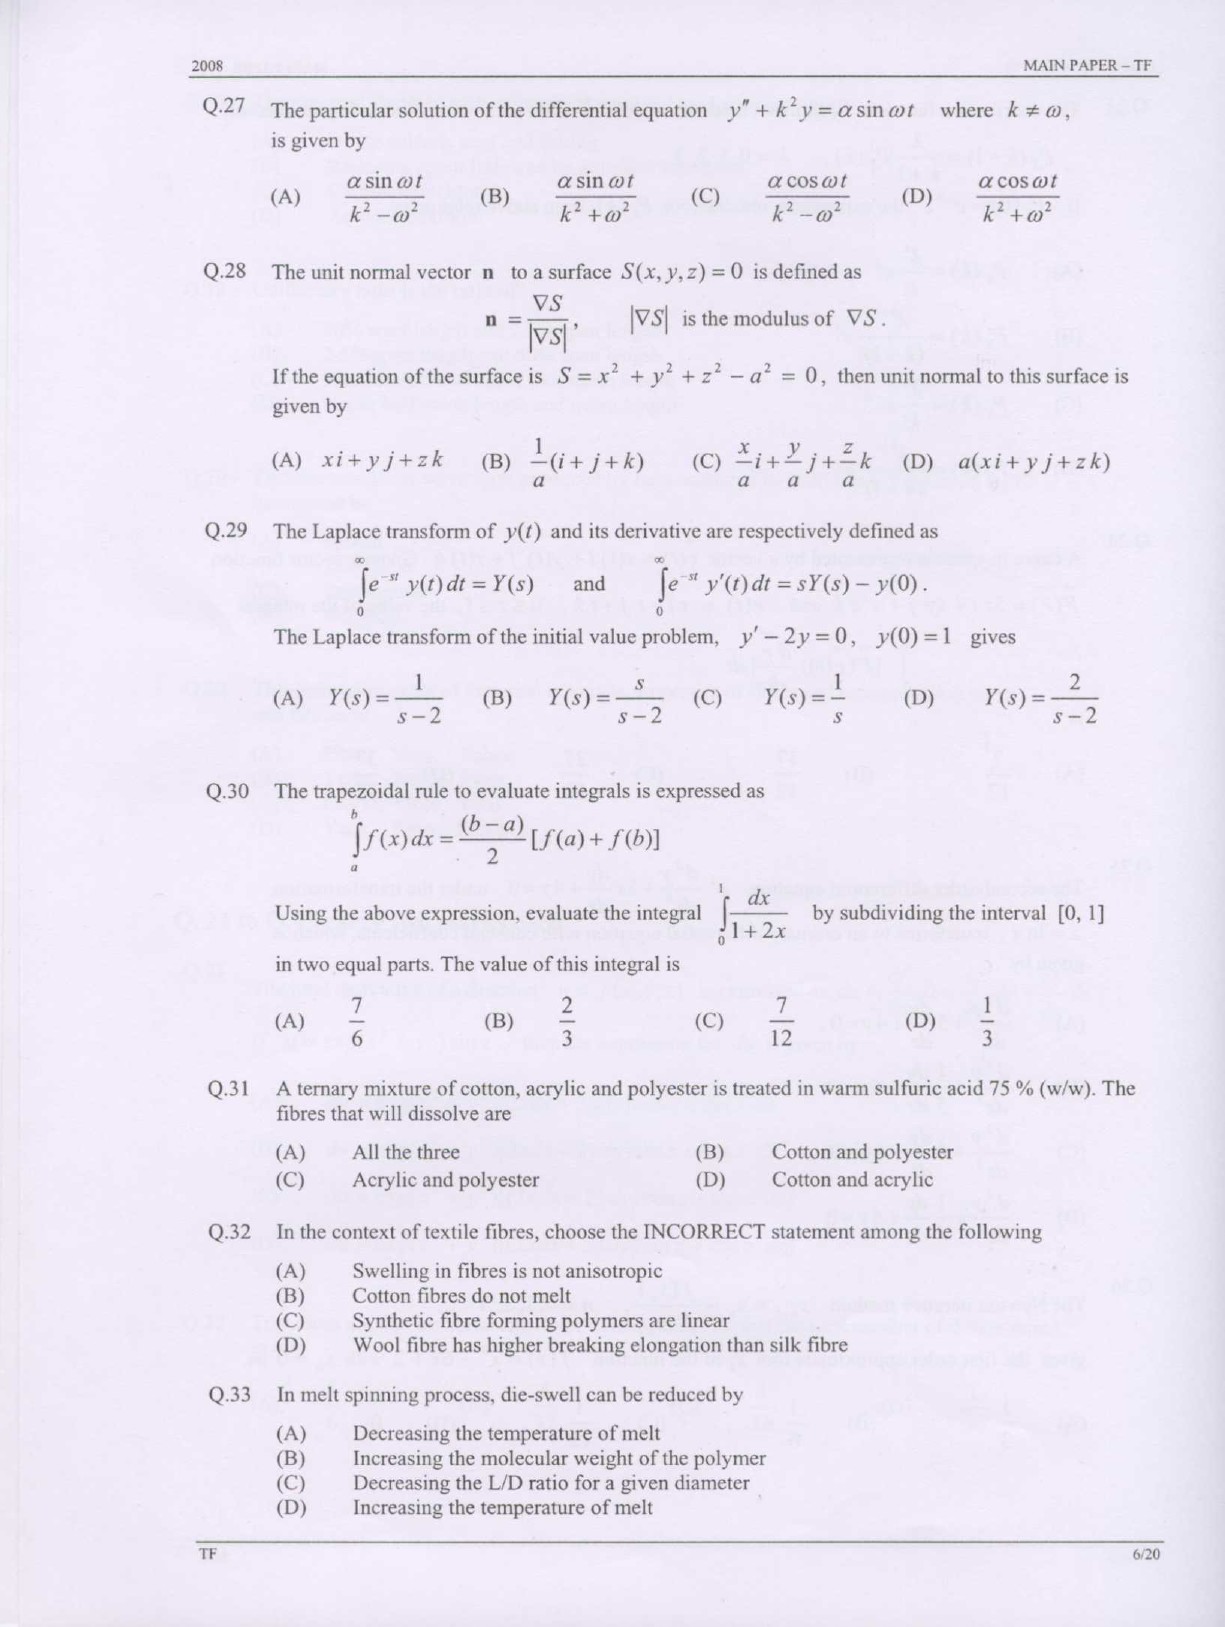 GATE Exam Question Paper 2008 Textile Engineering and Fibre Science 6